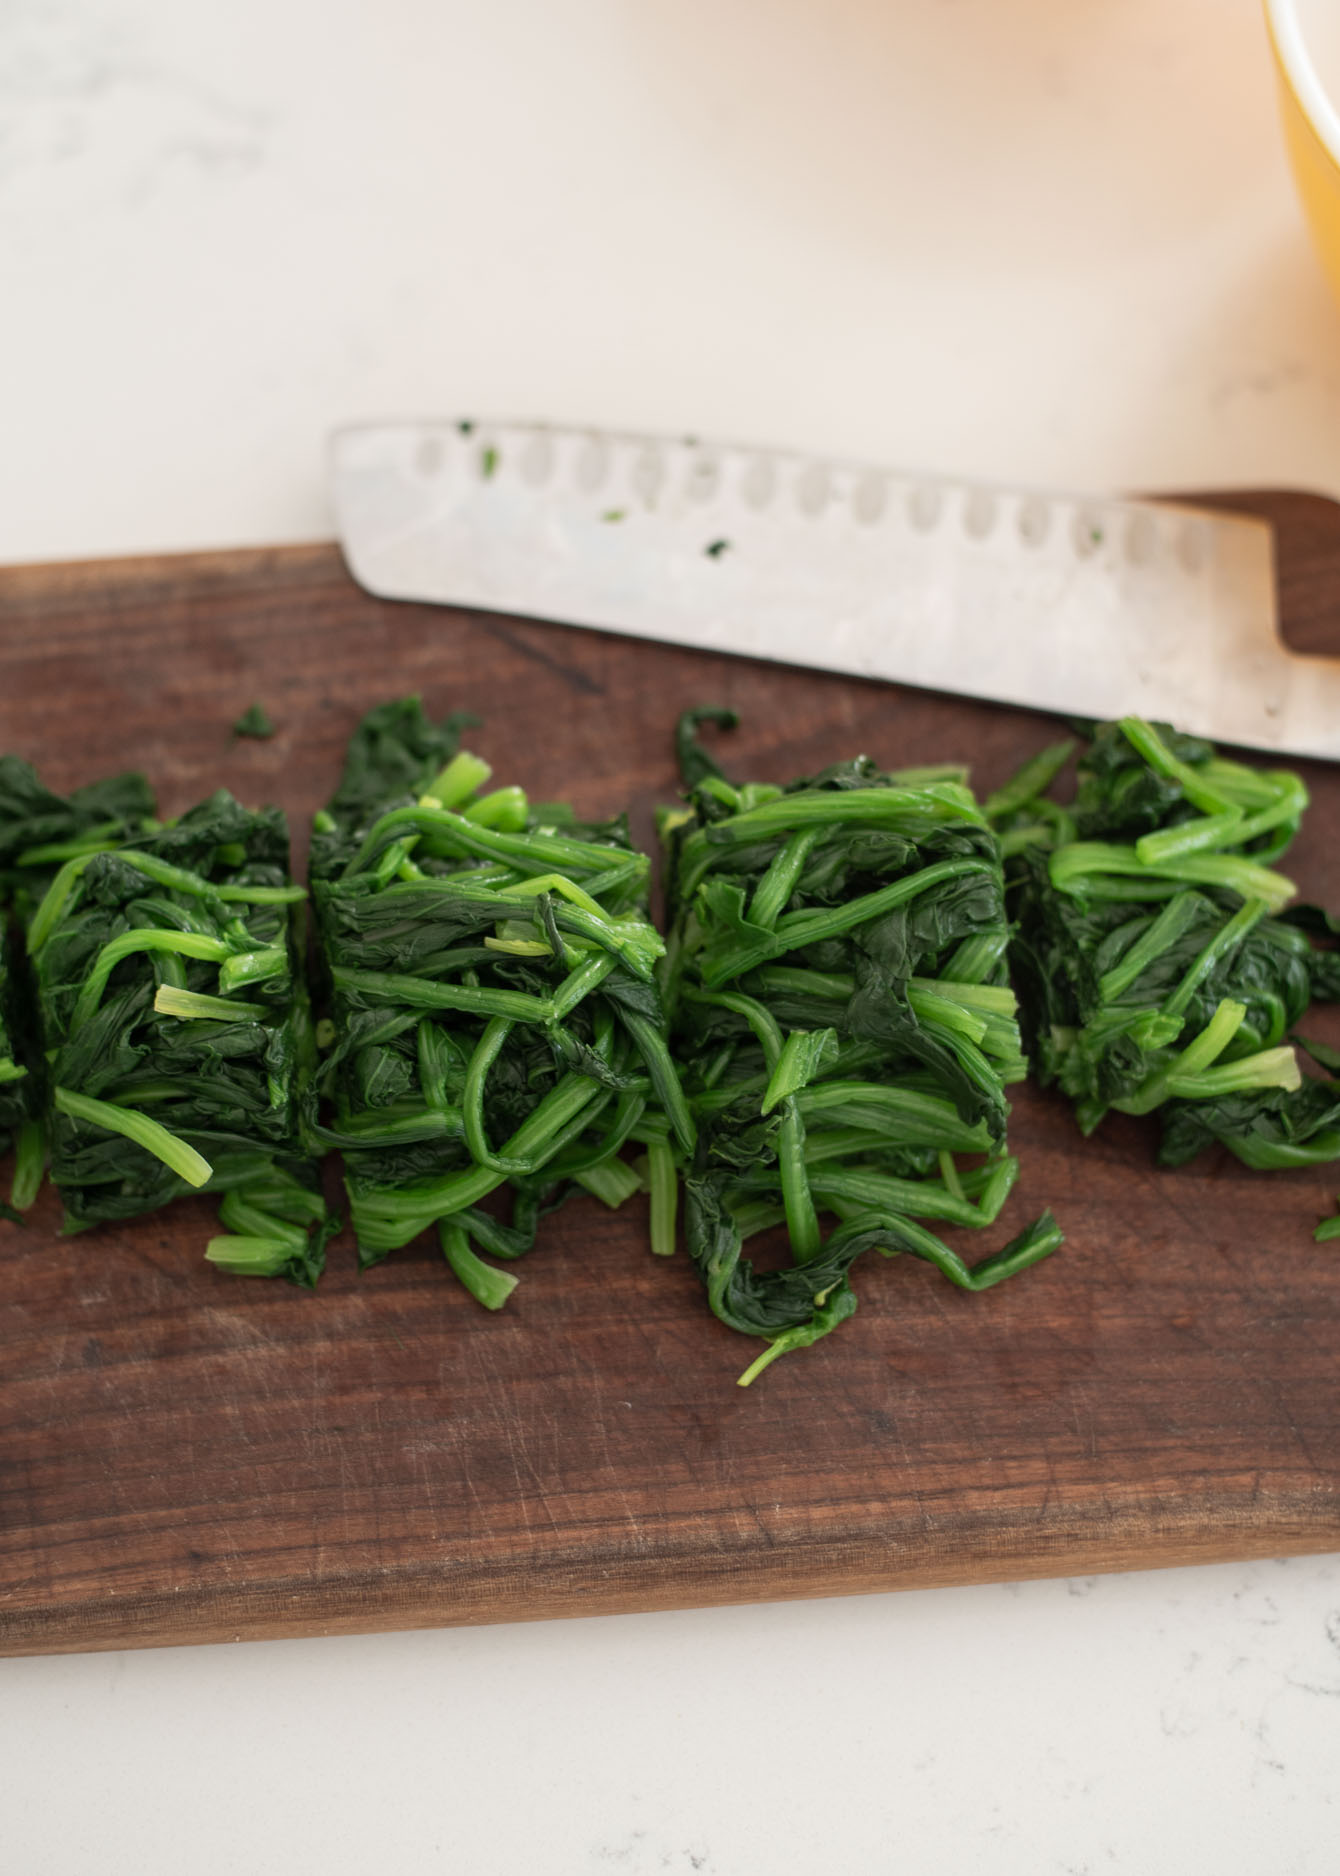 Long strands of blanched spinach is cut into section.